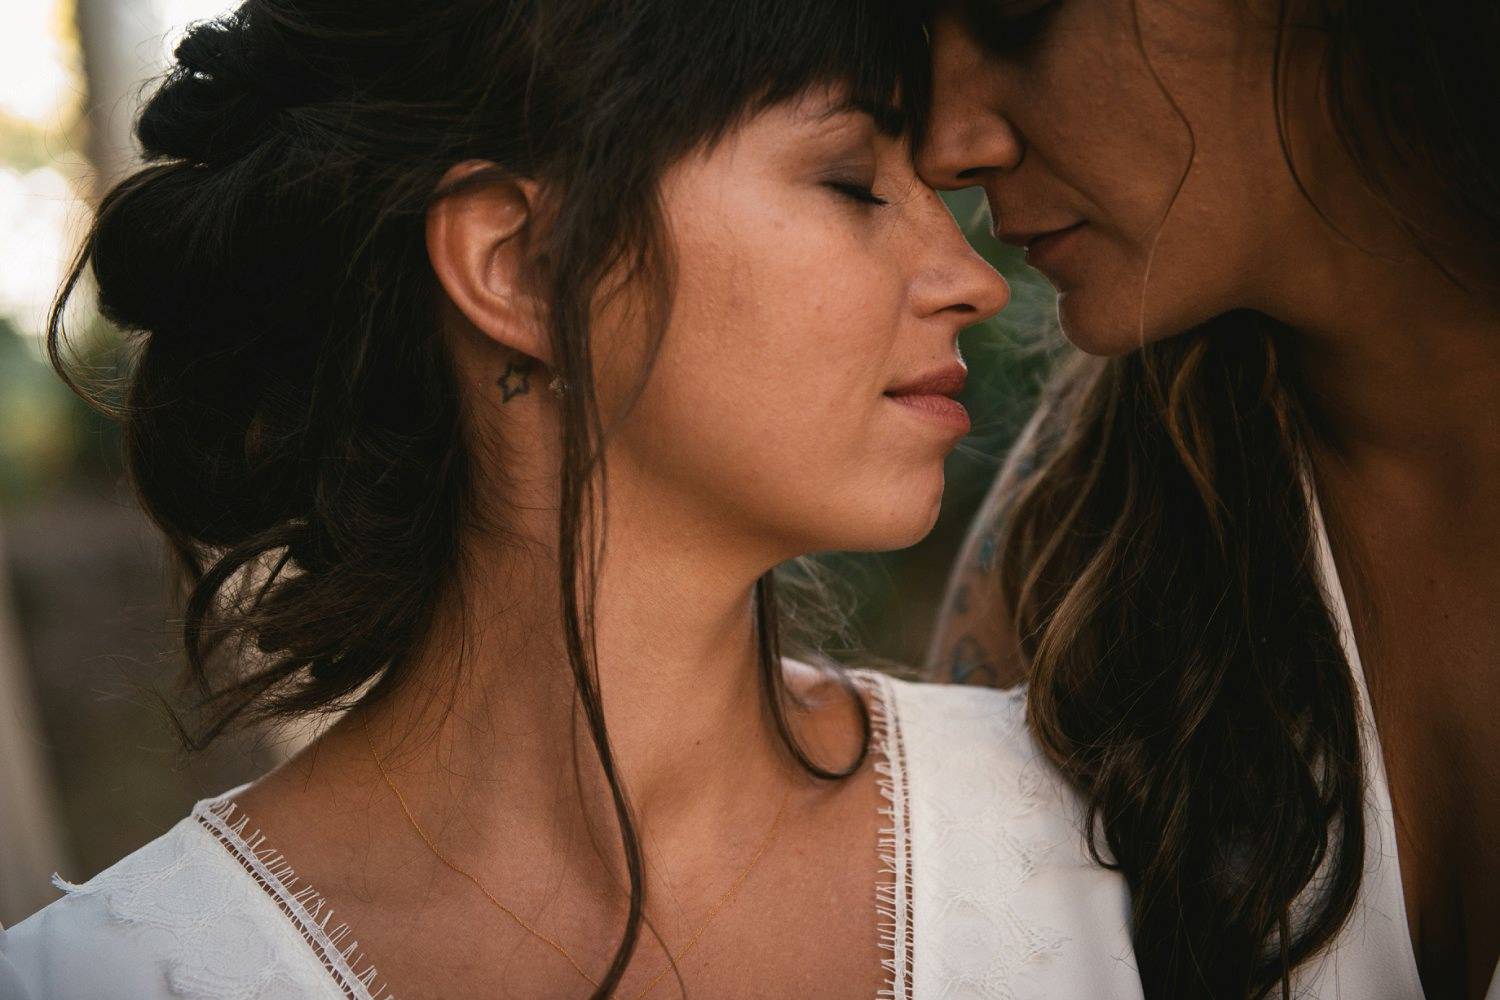 Two brides lean toward each other until their foreheads are touching